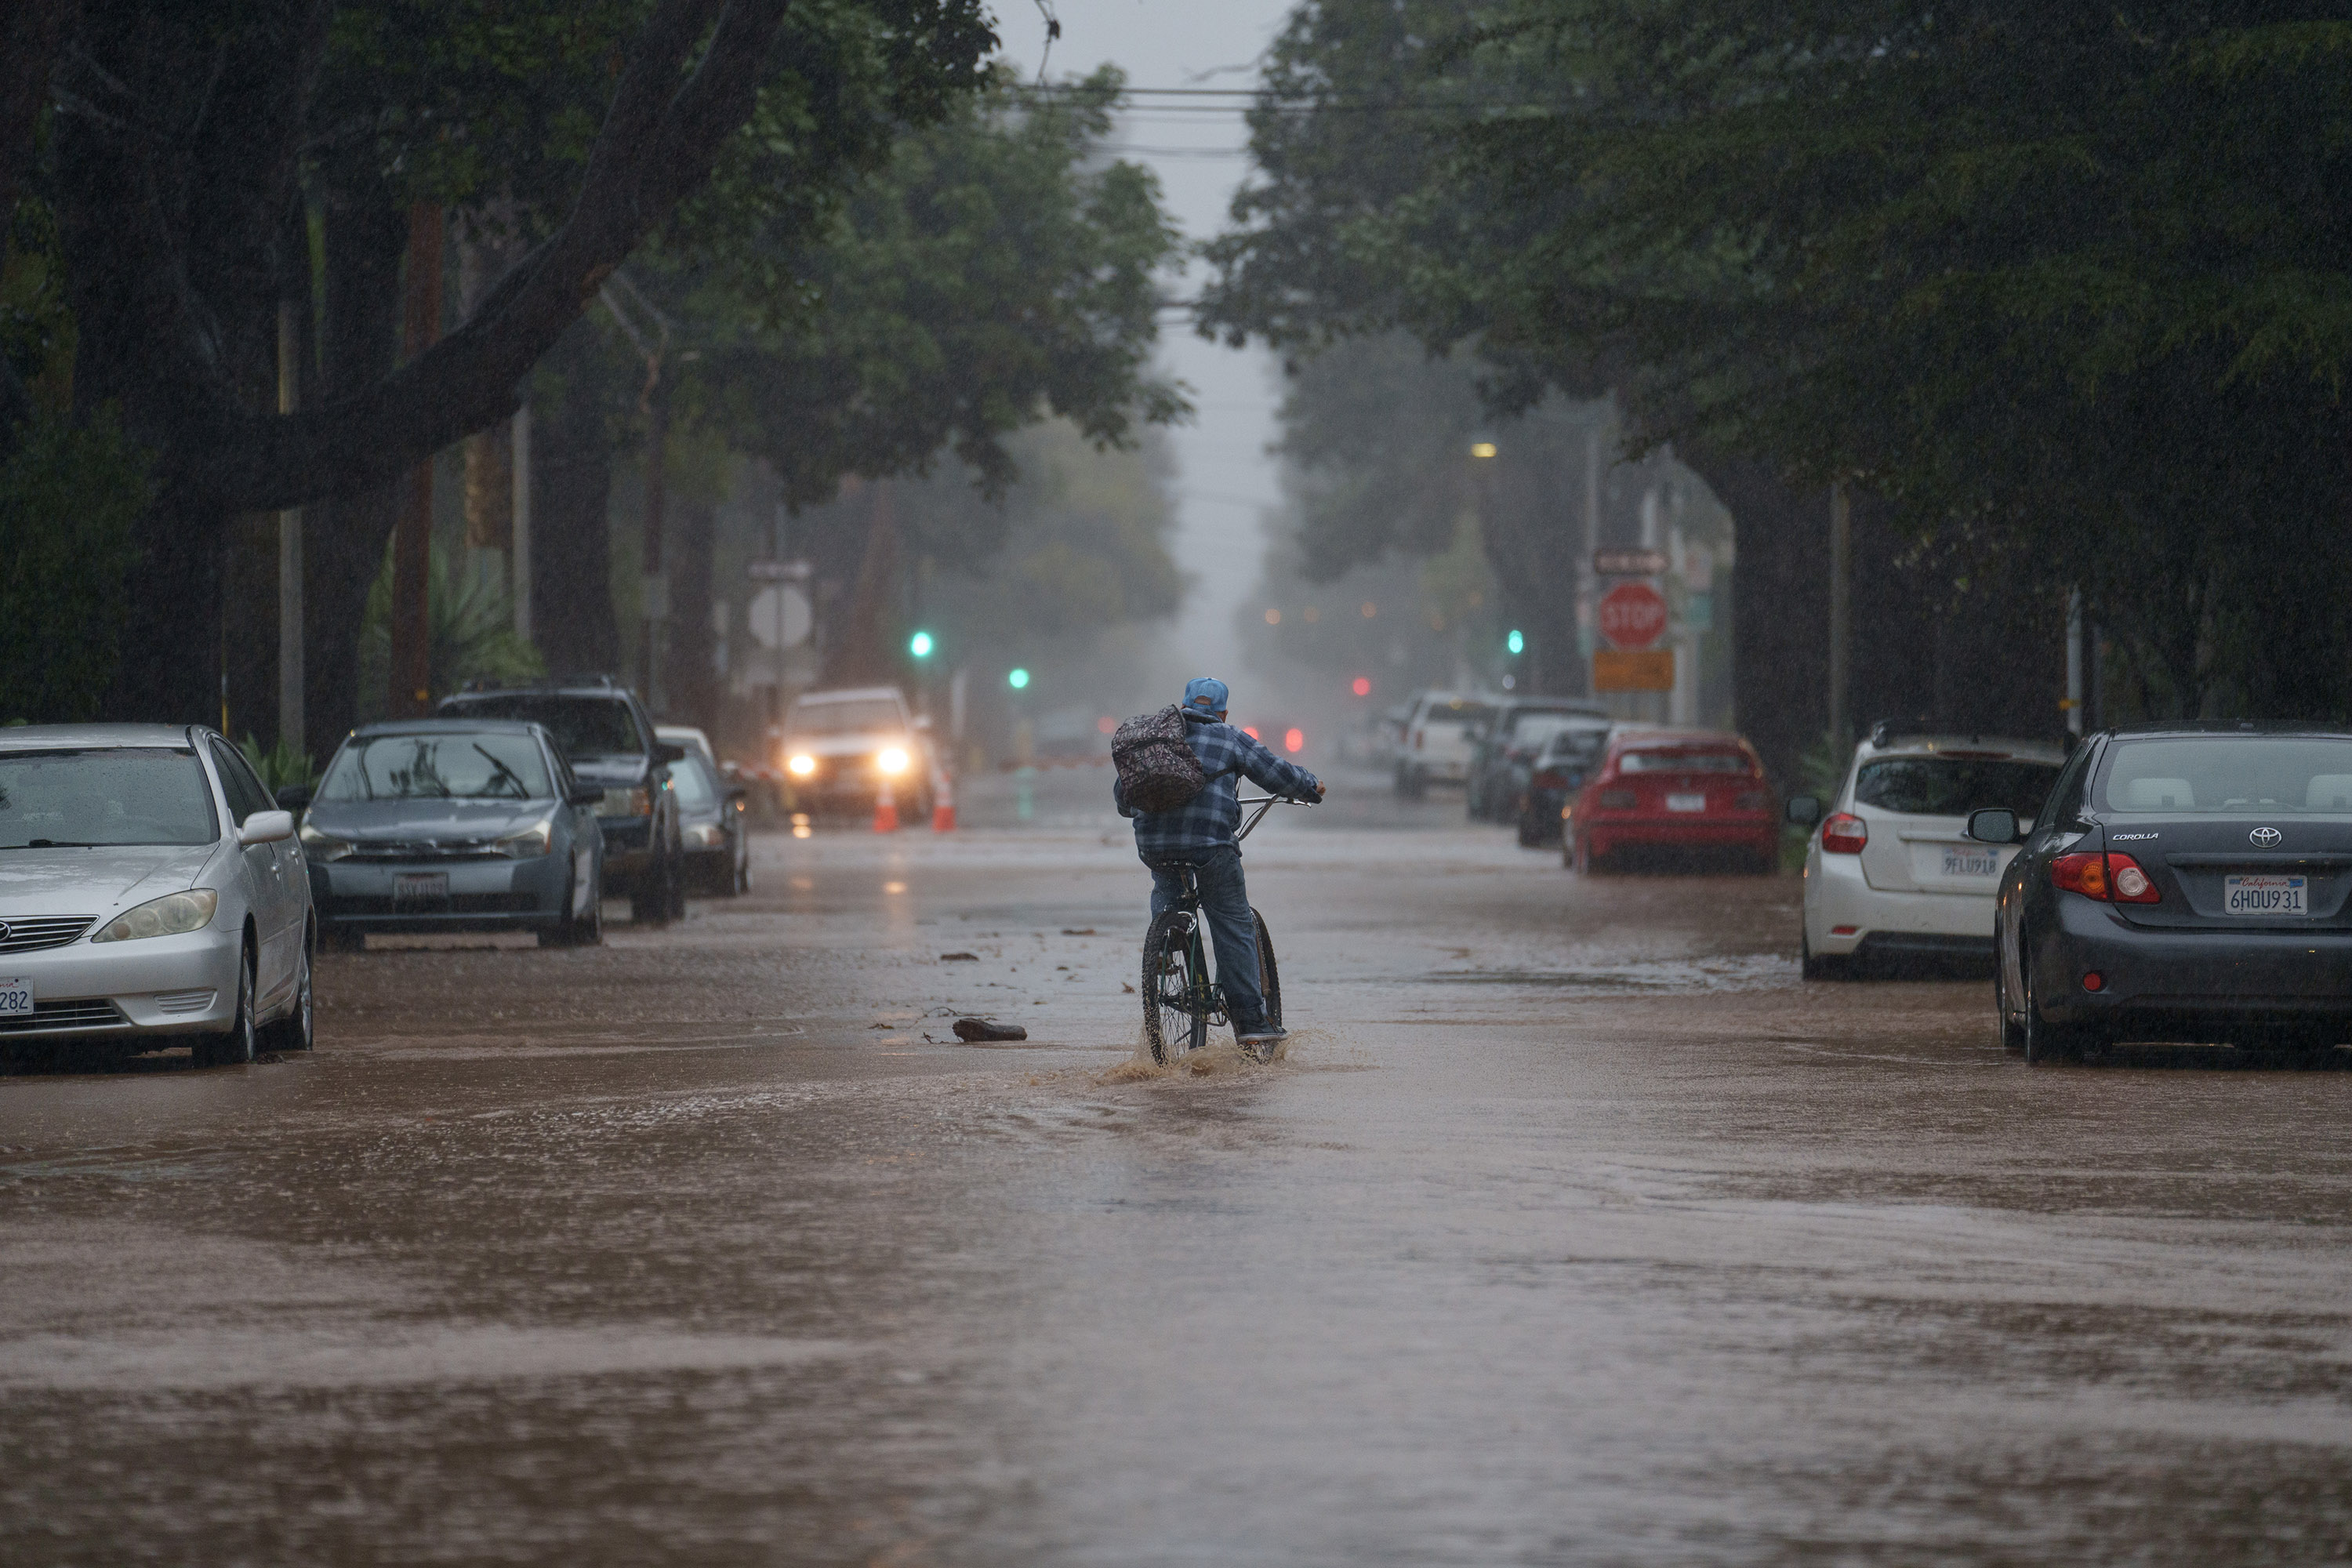 A person rides a bike through floodwaters during a storm in Santa Barbara, California, on Sunday, Februar 4.